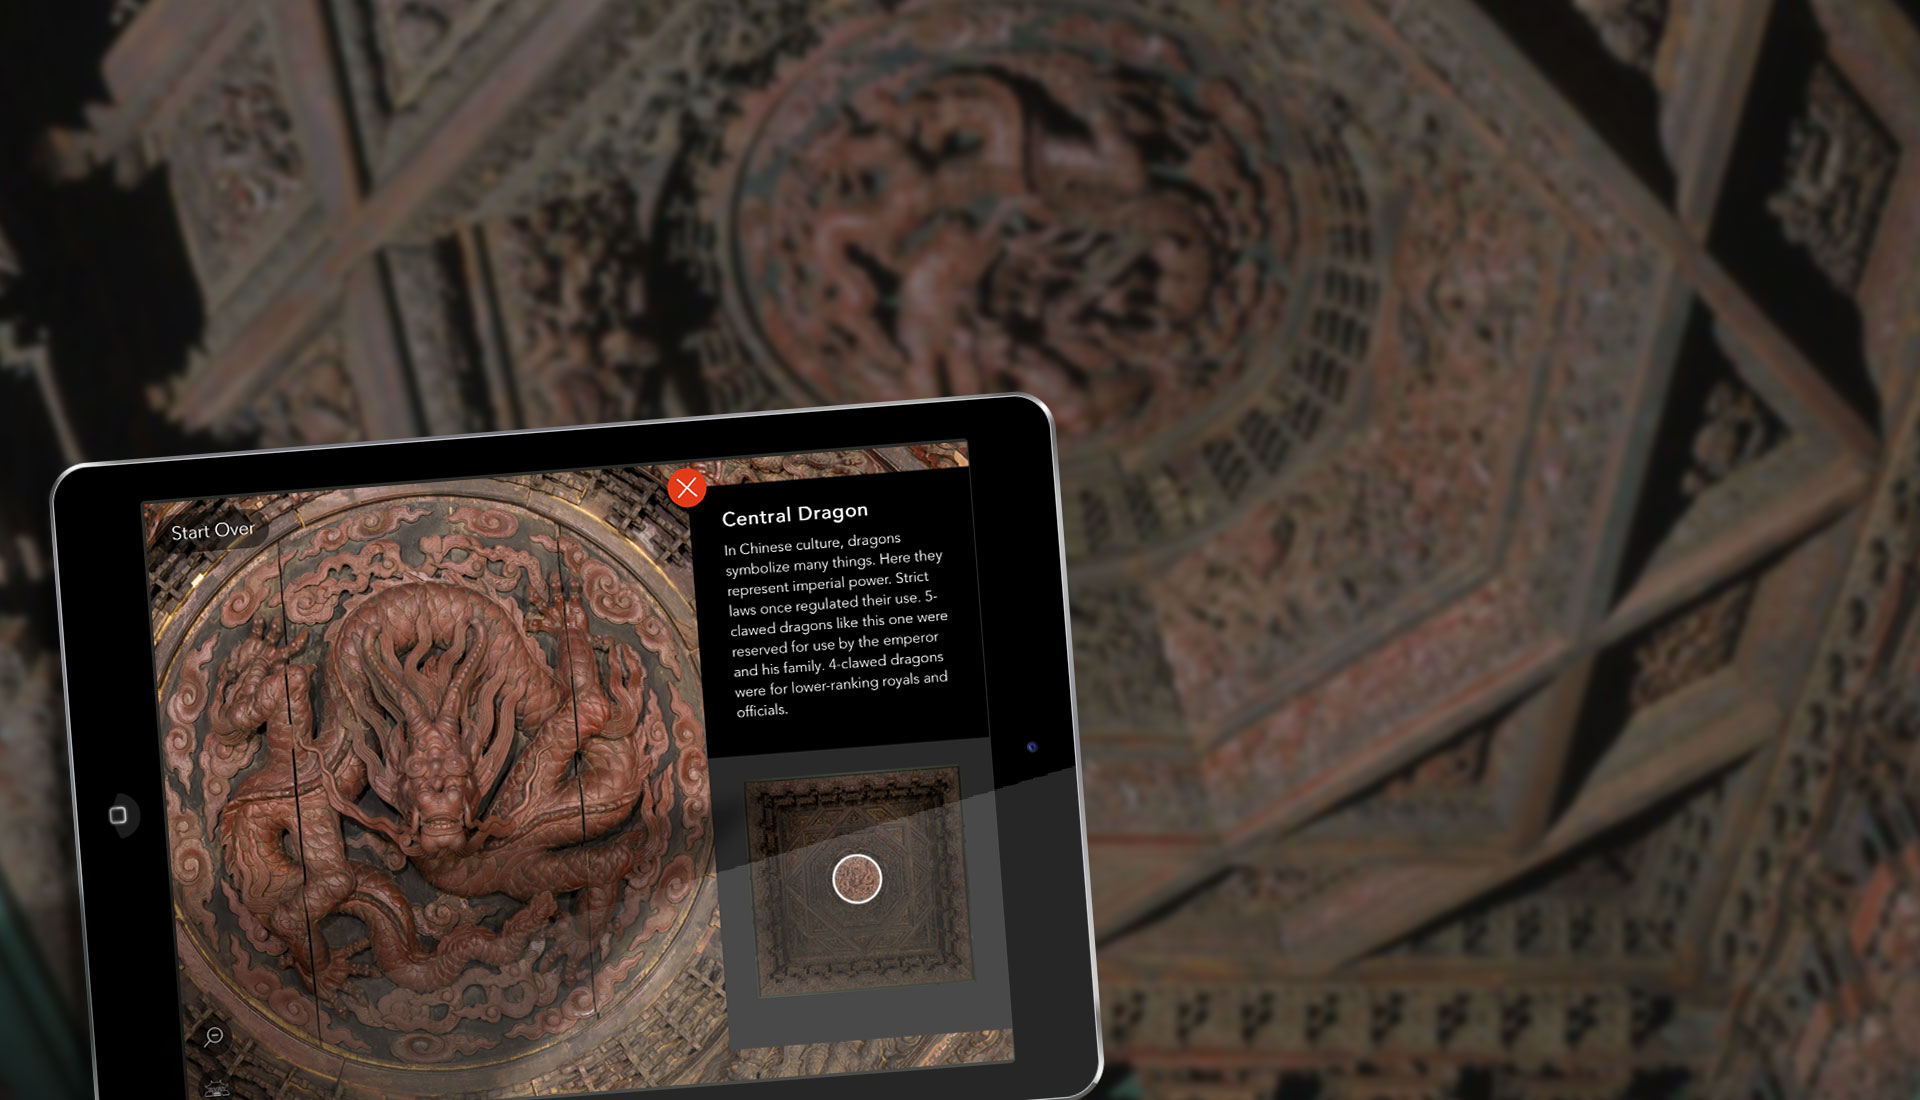 An iPad with the app on-screen, showing the large central dragon with complementary material to learn about this icon within the ceiling. 